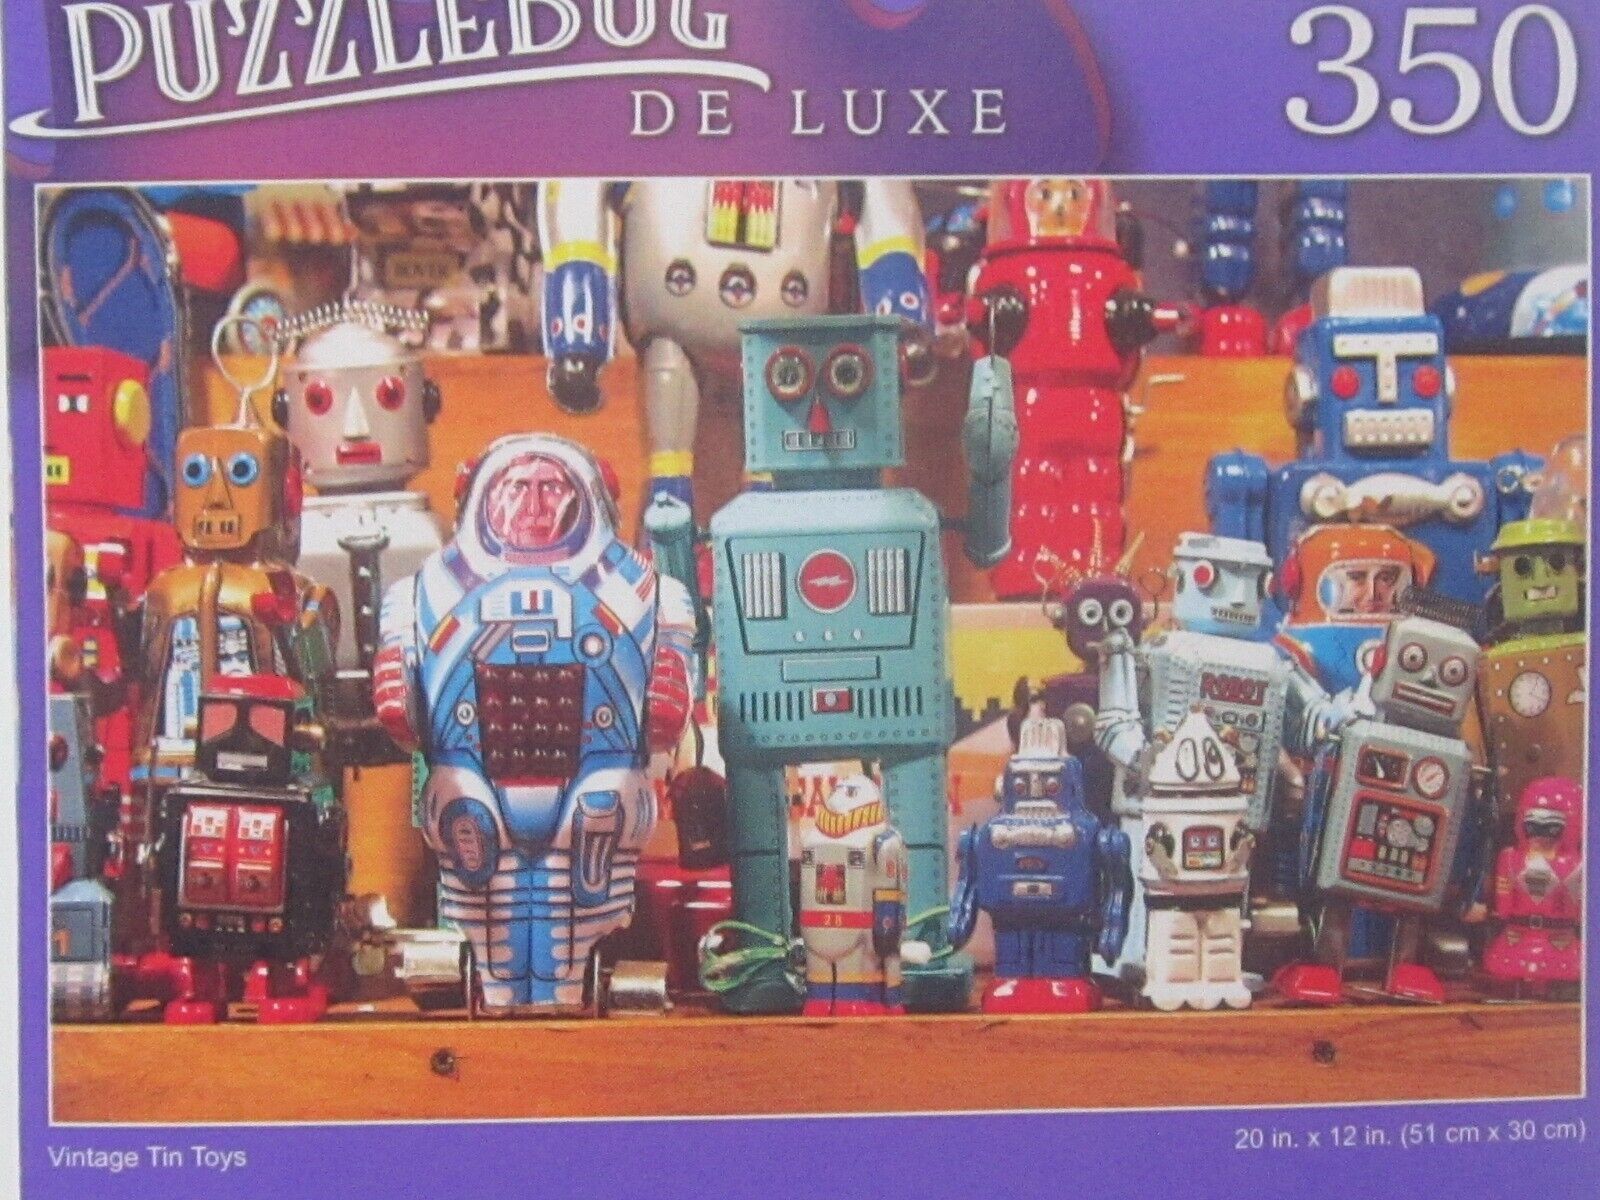 Puzzlebug Fun Deluxe 350 Thicker Pcs 20" x 12"  Vintage Tin Toys Ages 9+ New! - $3.96